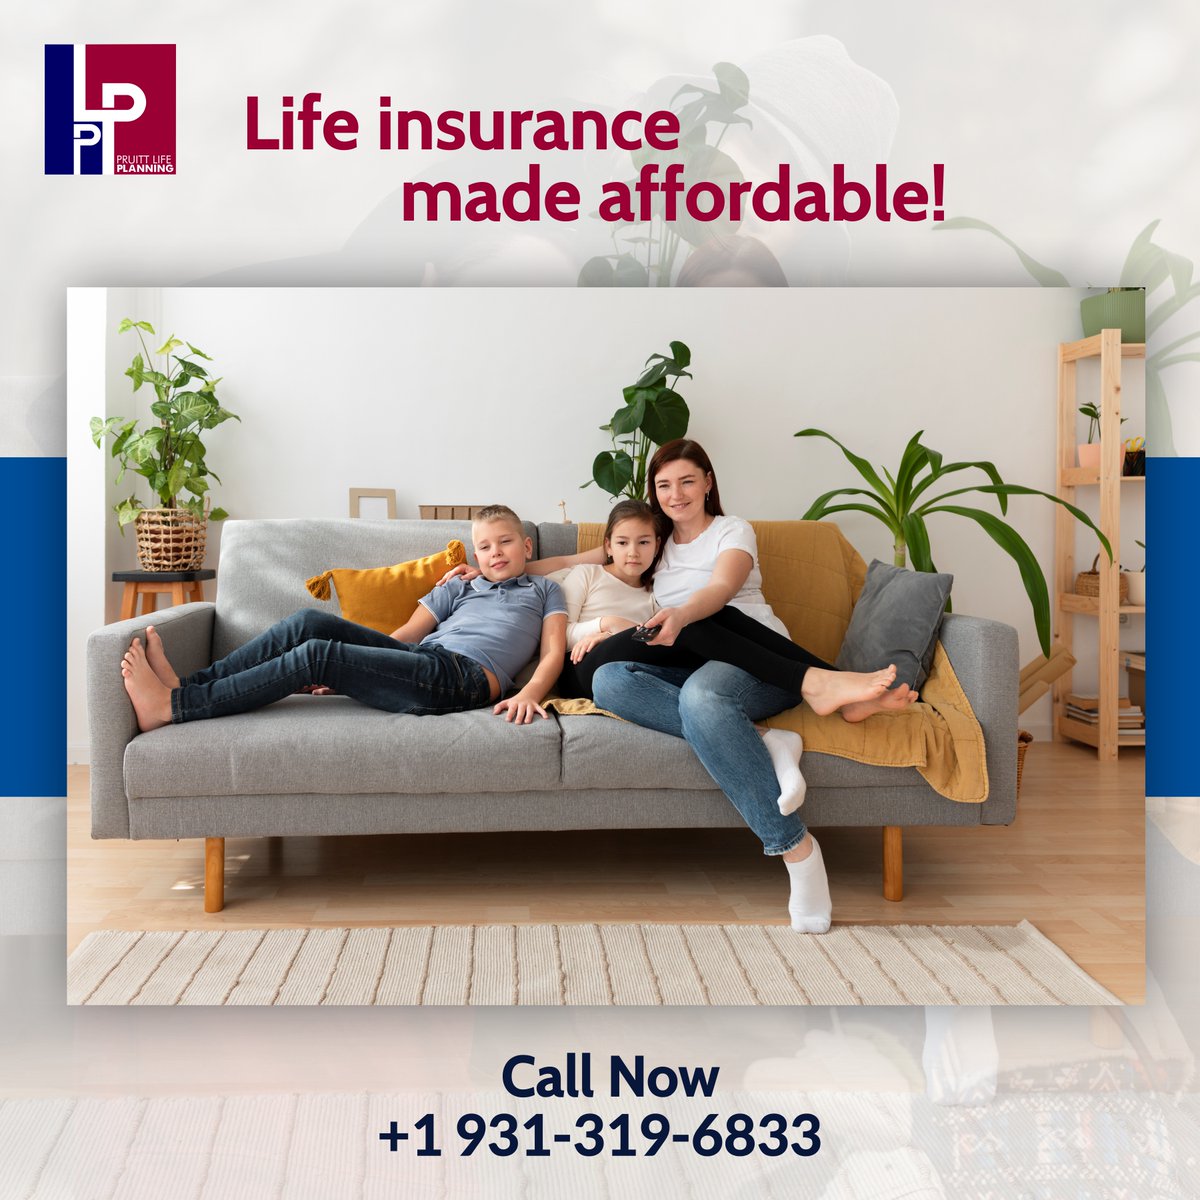 Say goodbye to high premiums and hello to affordable protection. Reach out today and let's safeguard what matters most.

Call Us On +1 931-319-6833

#PruittLifePlanning #LifeInsurance #AffordableCoverage #FinancialSecurity #ProtectYourFamily #PeaceOfMind #InsuranceMadeEasy